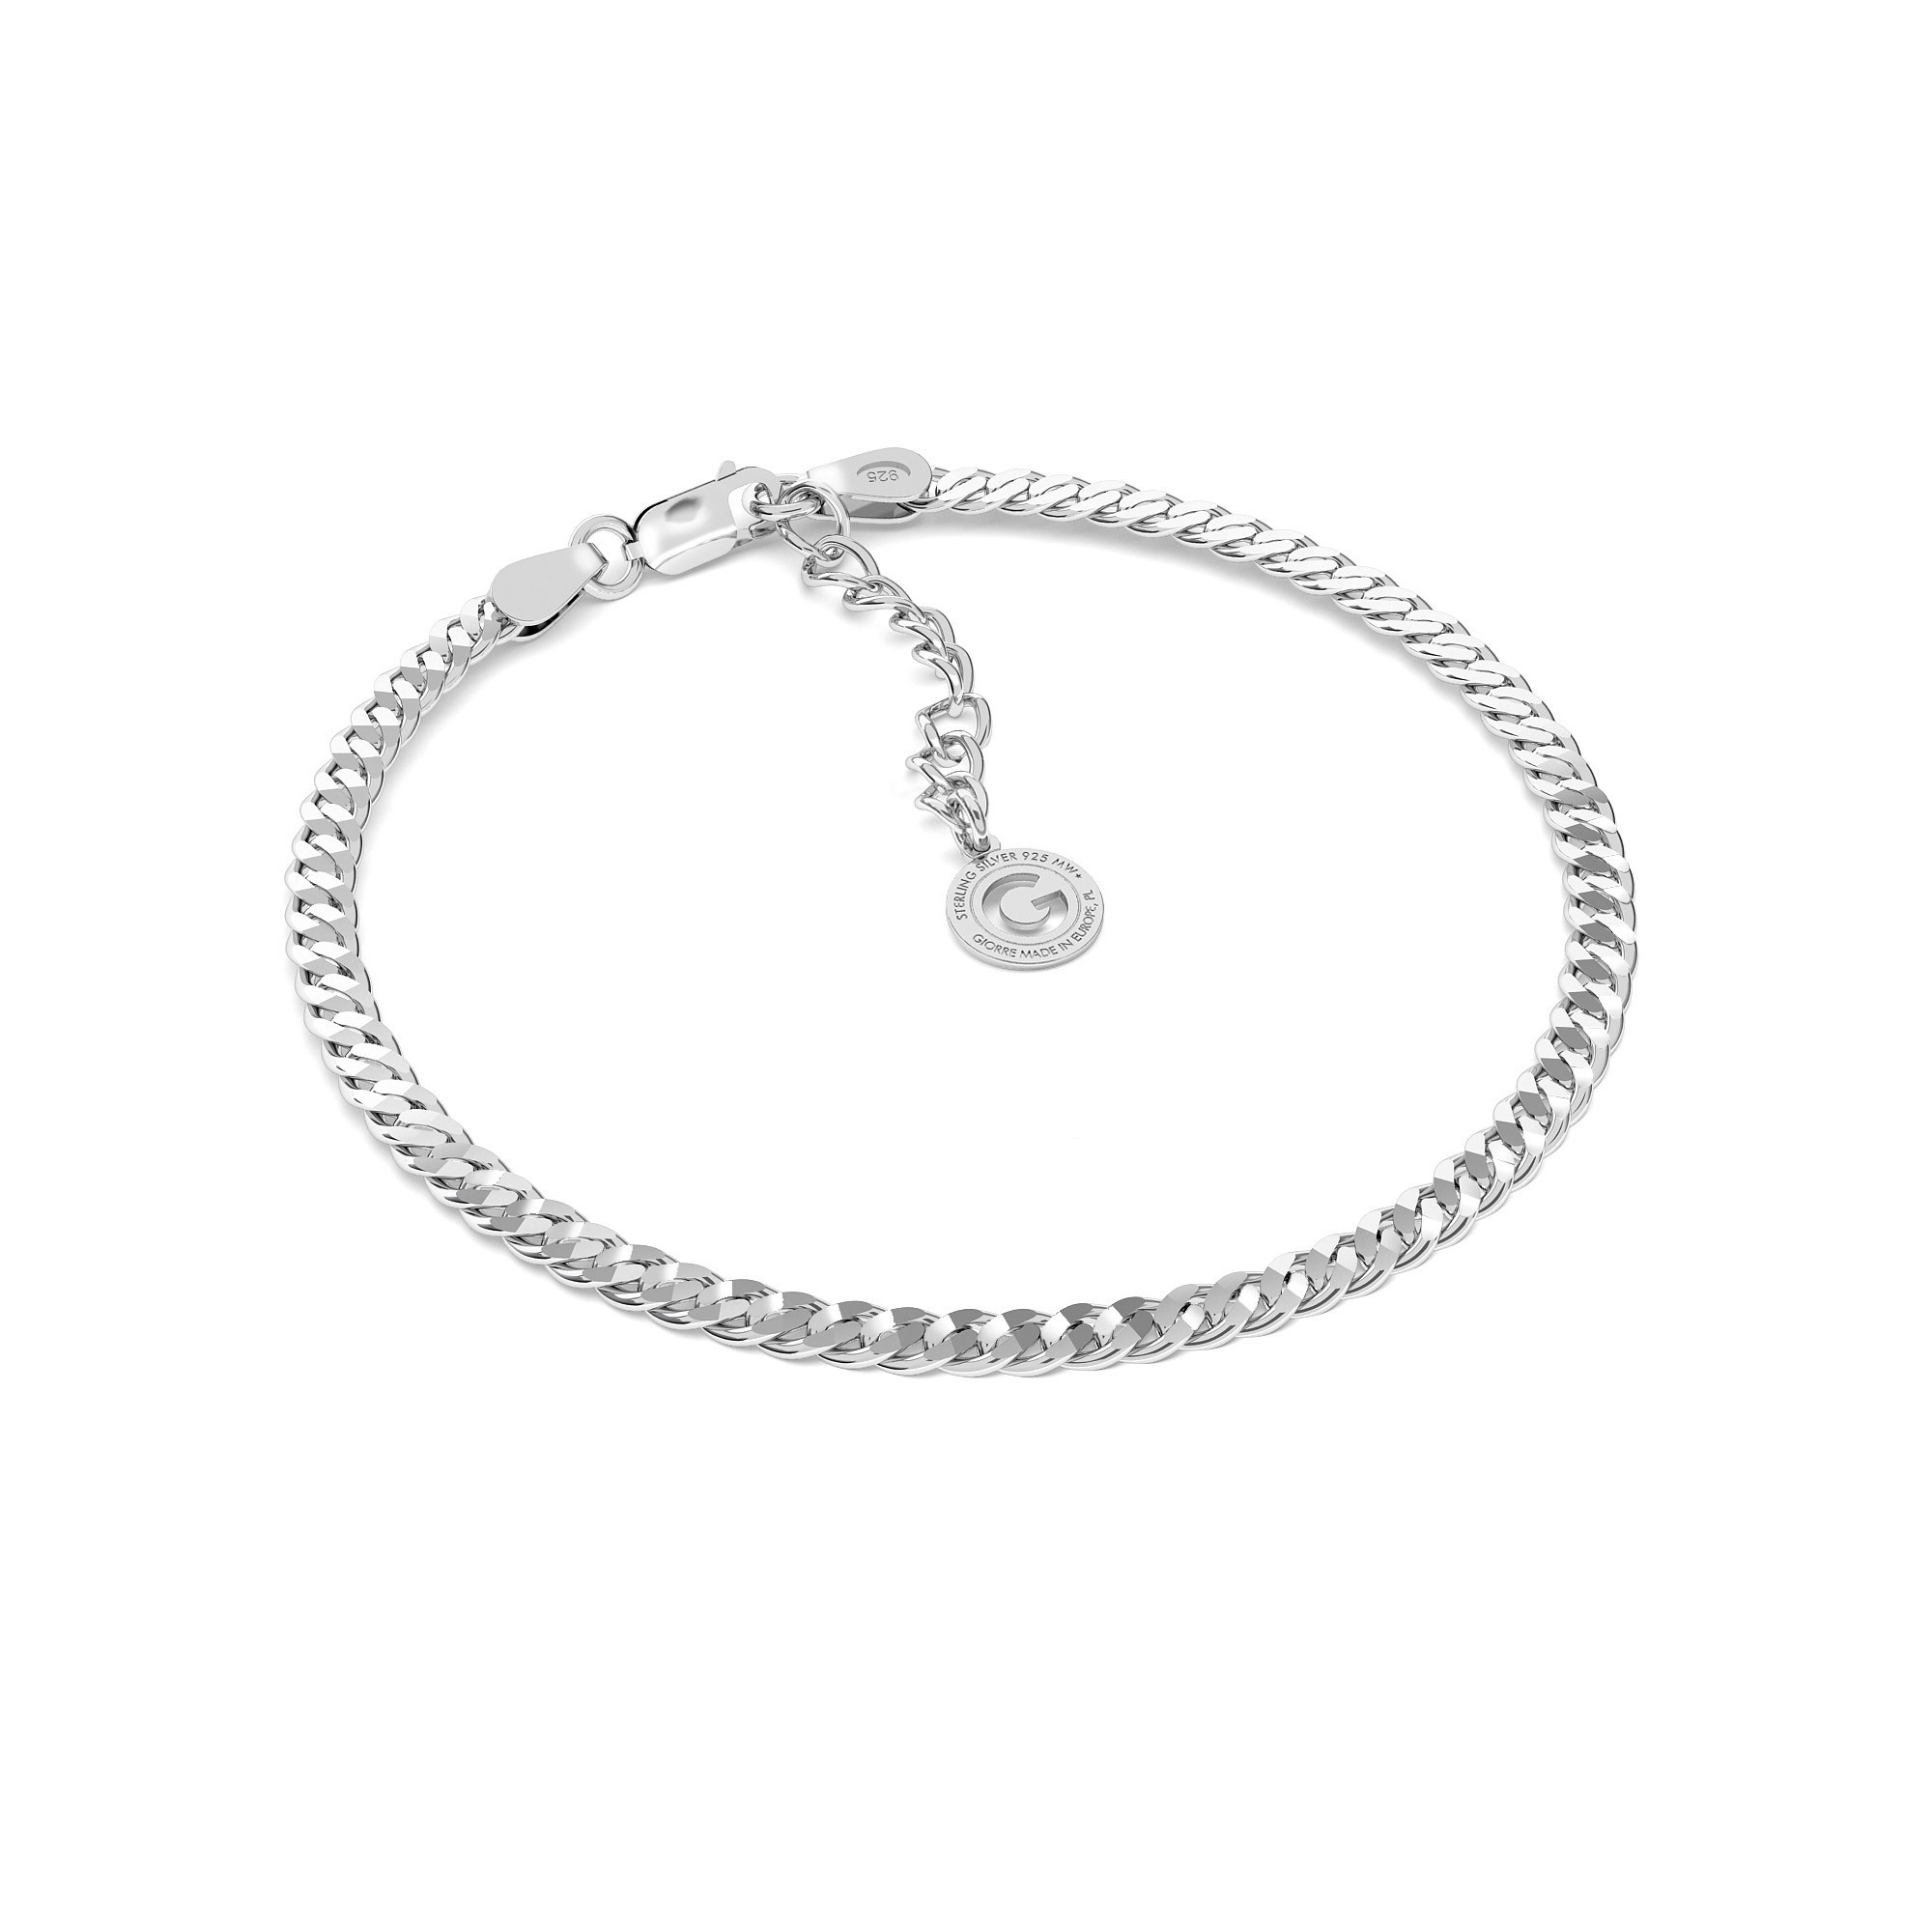 Curb armband T°ra'vel'' sterling silber 925